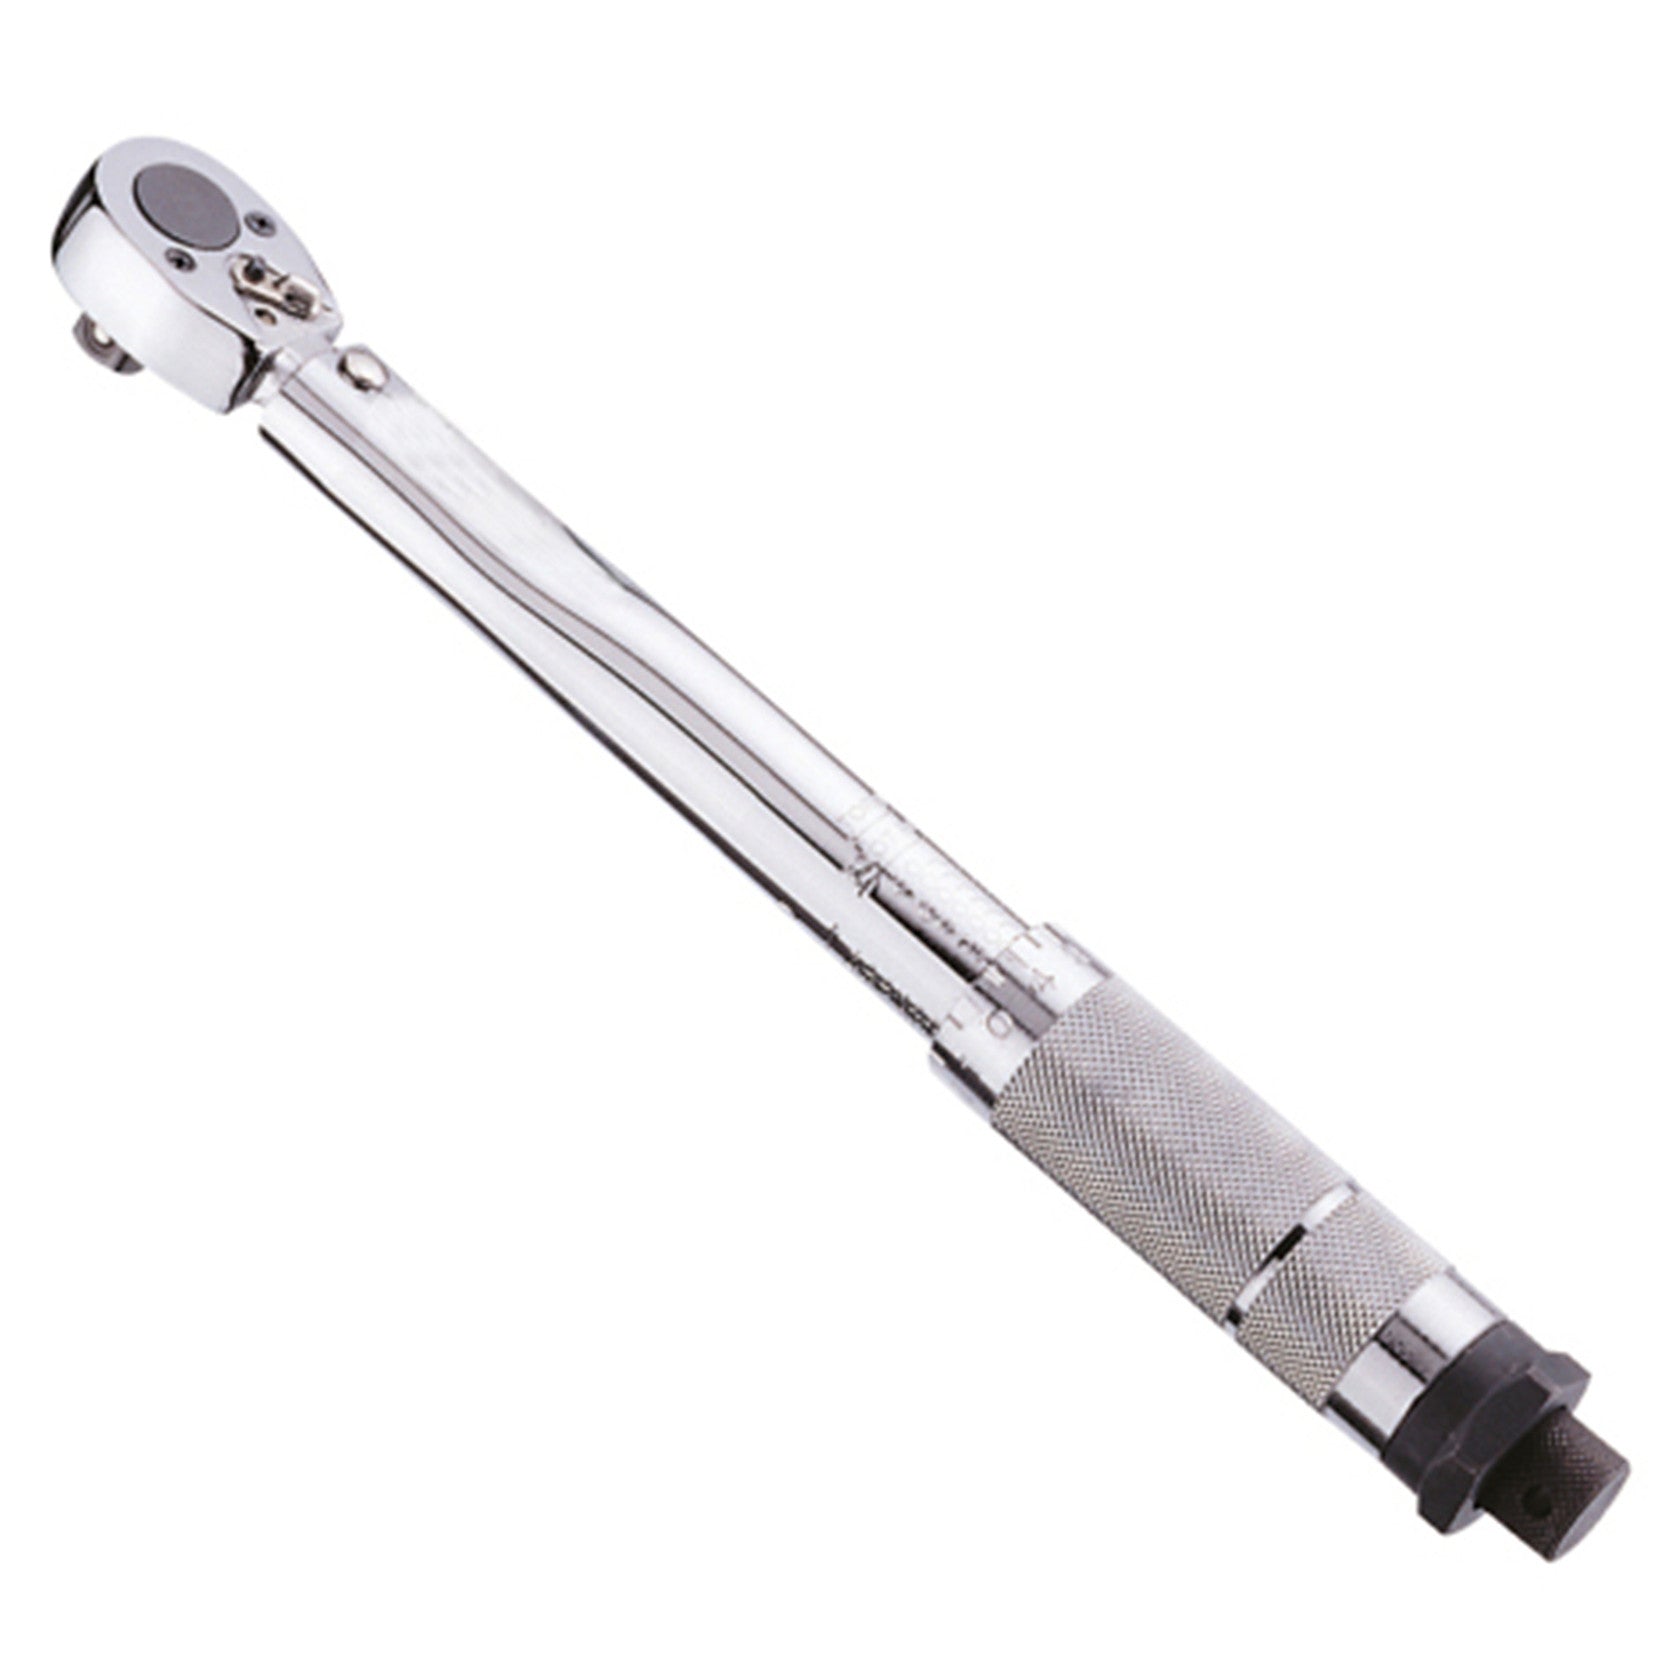 findmall Torque Wrench 1/2 Inch Drive Click-Type Hand 10-150 Ft/Lb(13.6-203.5 Nm) FINDMALLPARTS